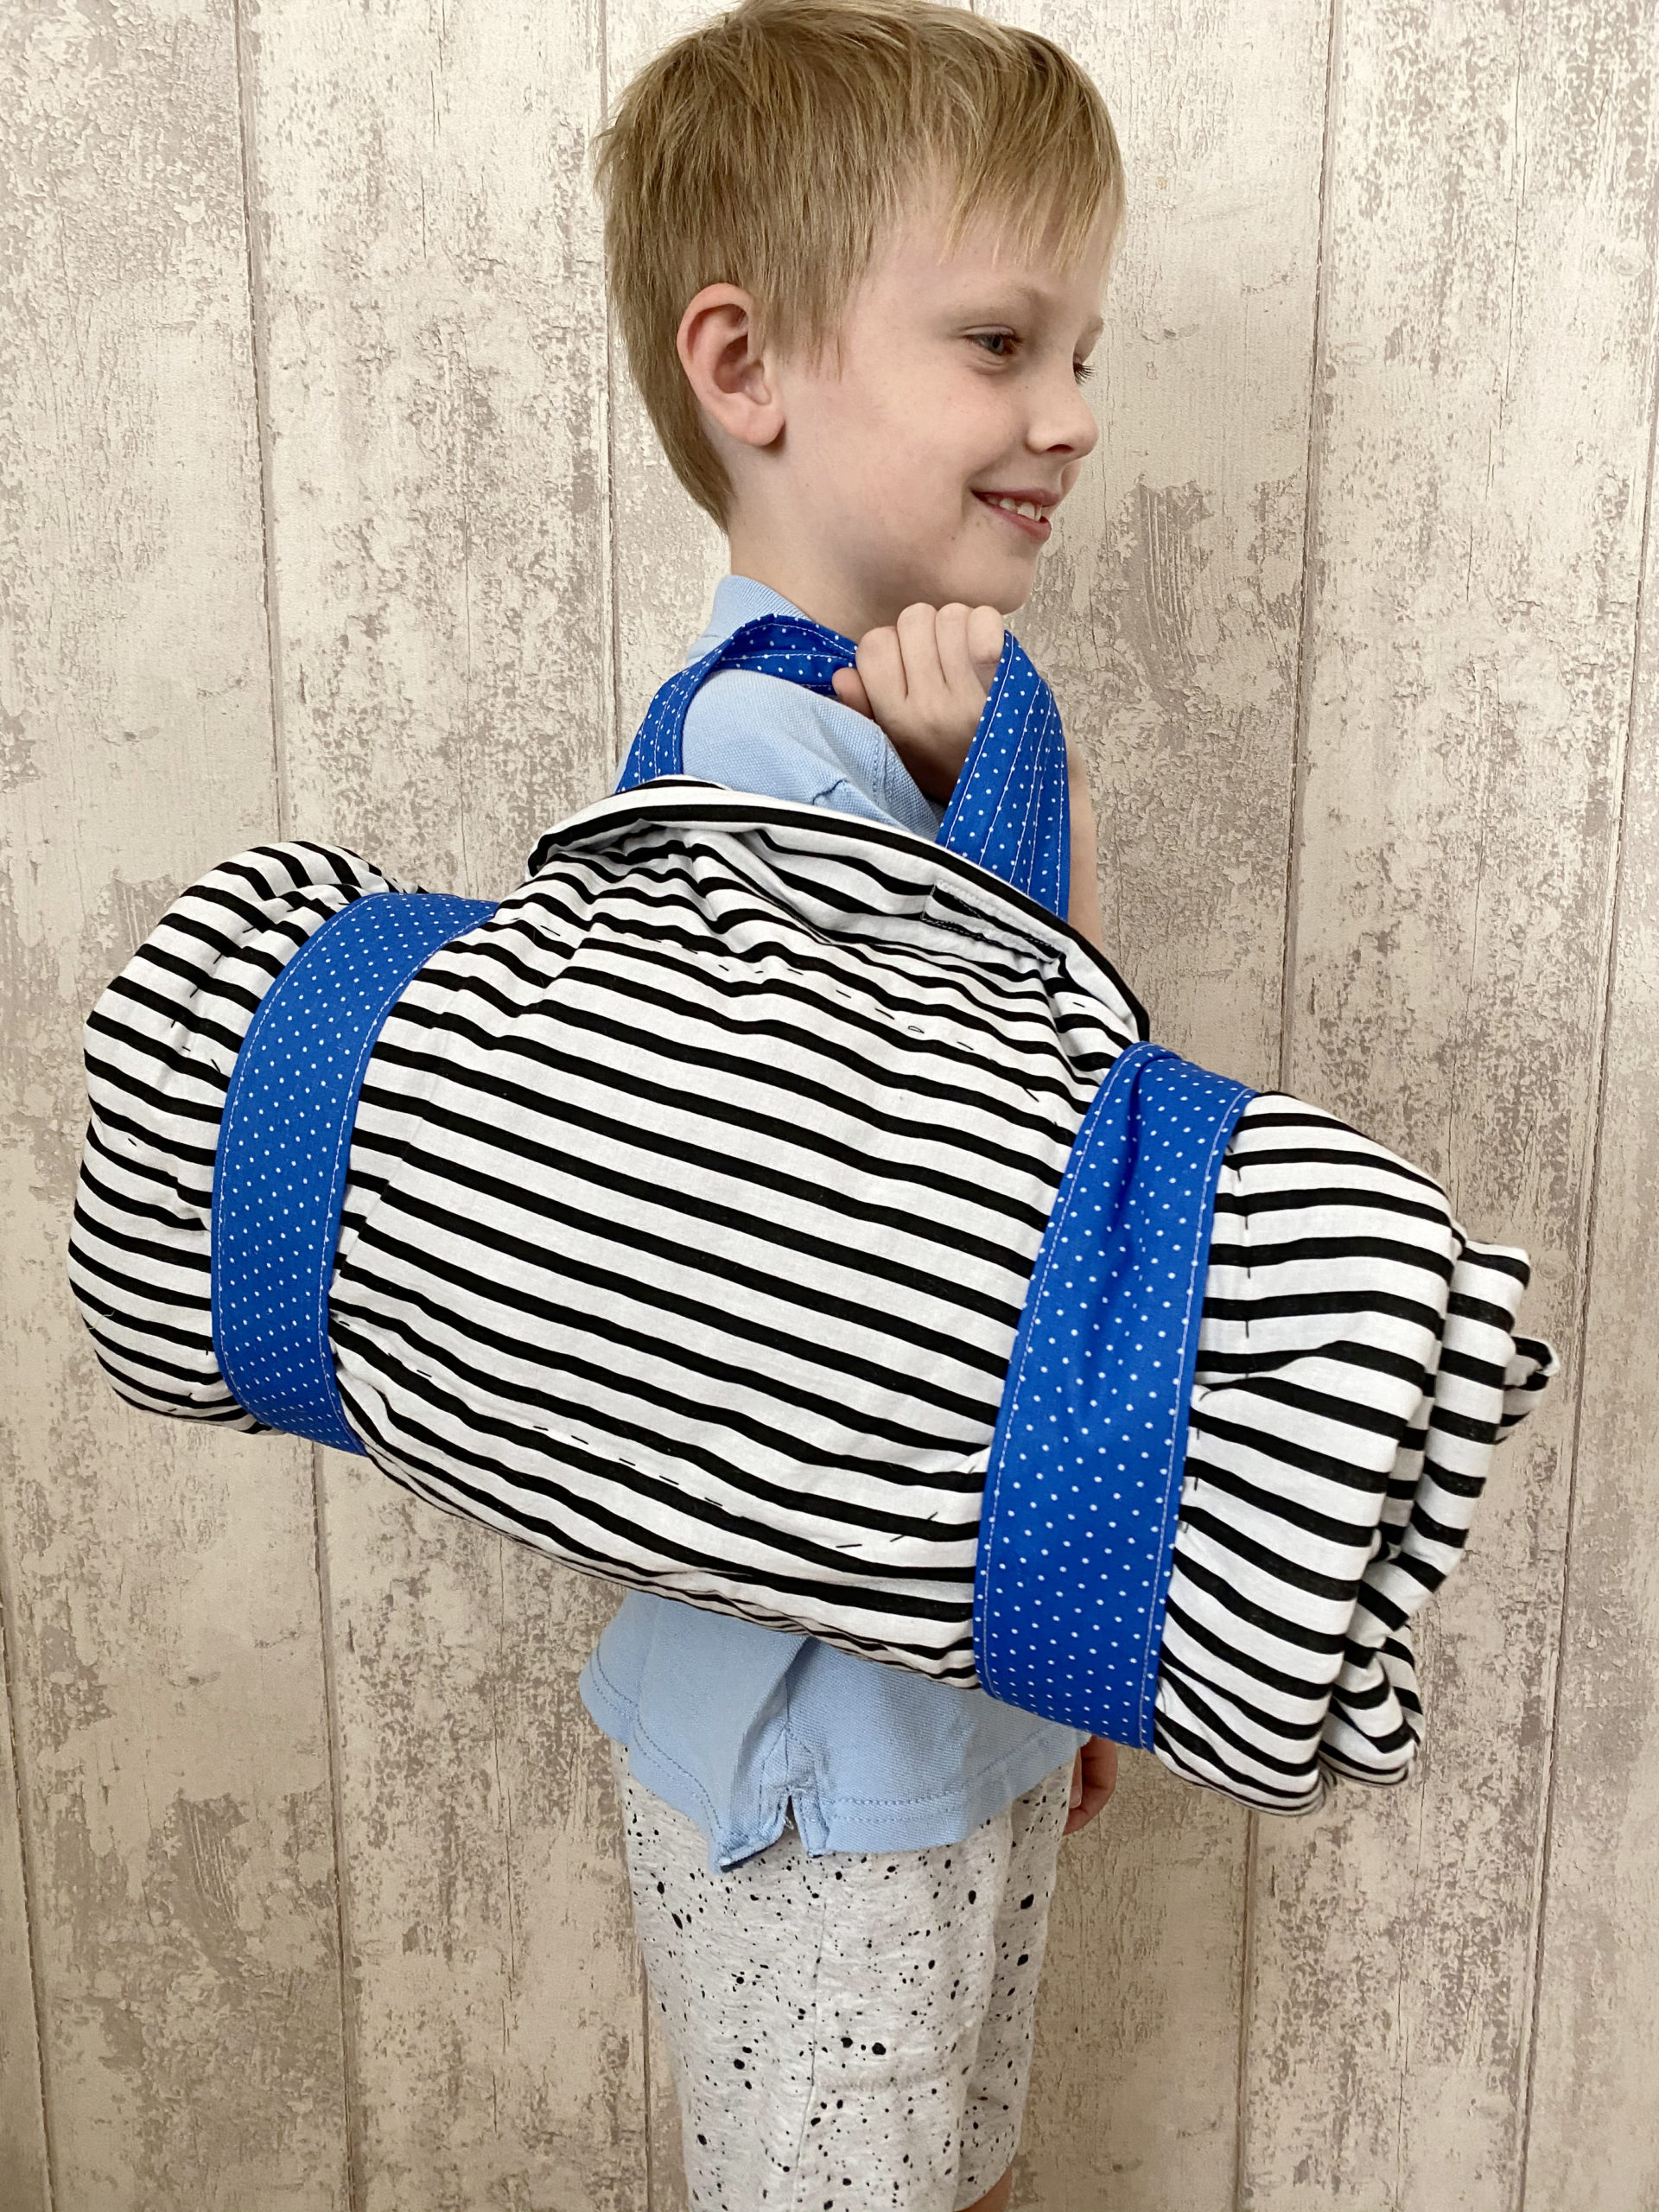 Sew a simple car mat or an intricate labor of love for hours of interactive play. This car mat sewing pattern makes a beautiful heirloom treasure.